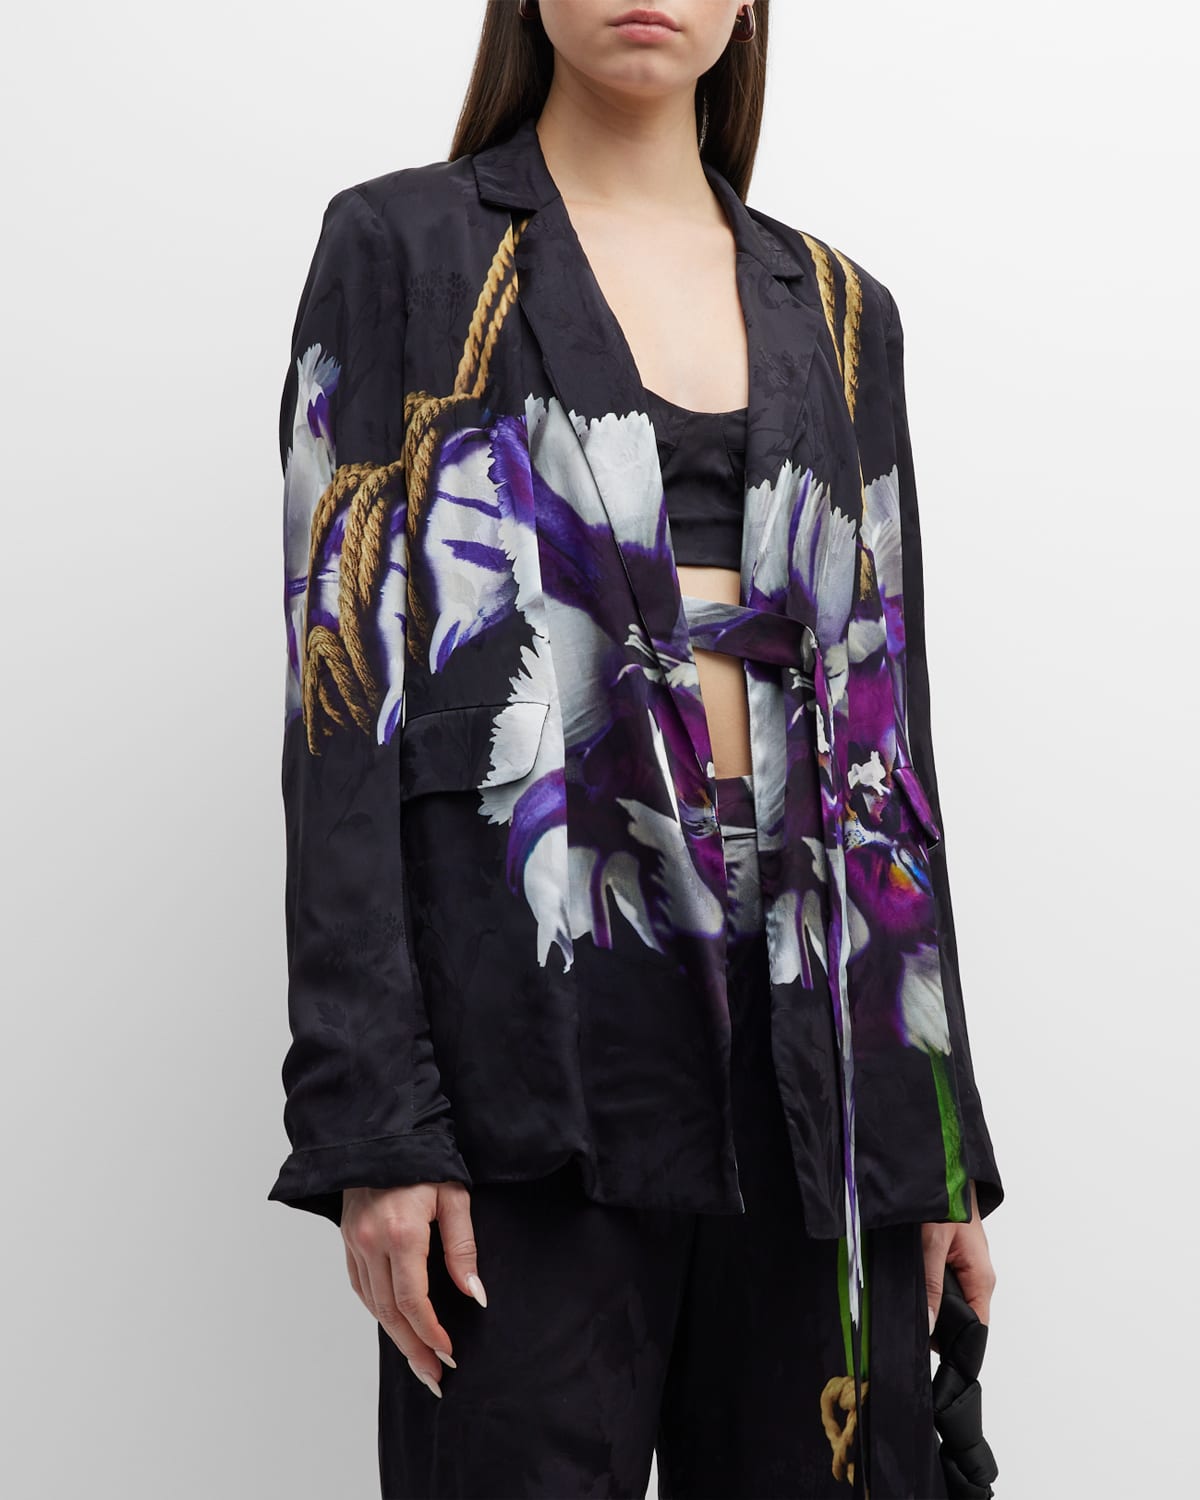 Floral Placed-Print Jacquard Single-Breasted Blazer